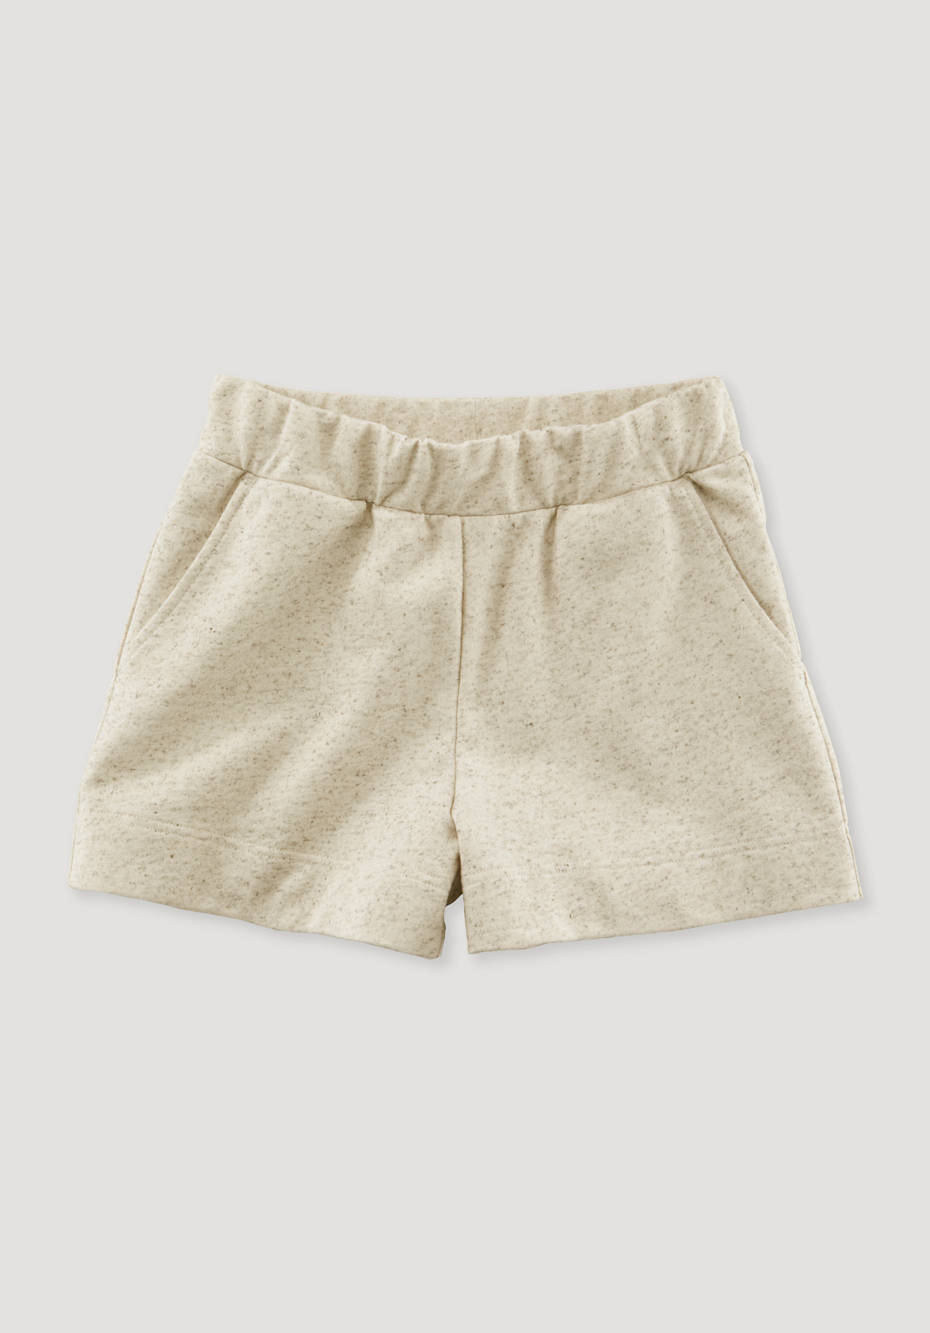 Shorts made from organic cotton with hemp and new wool